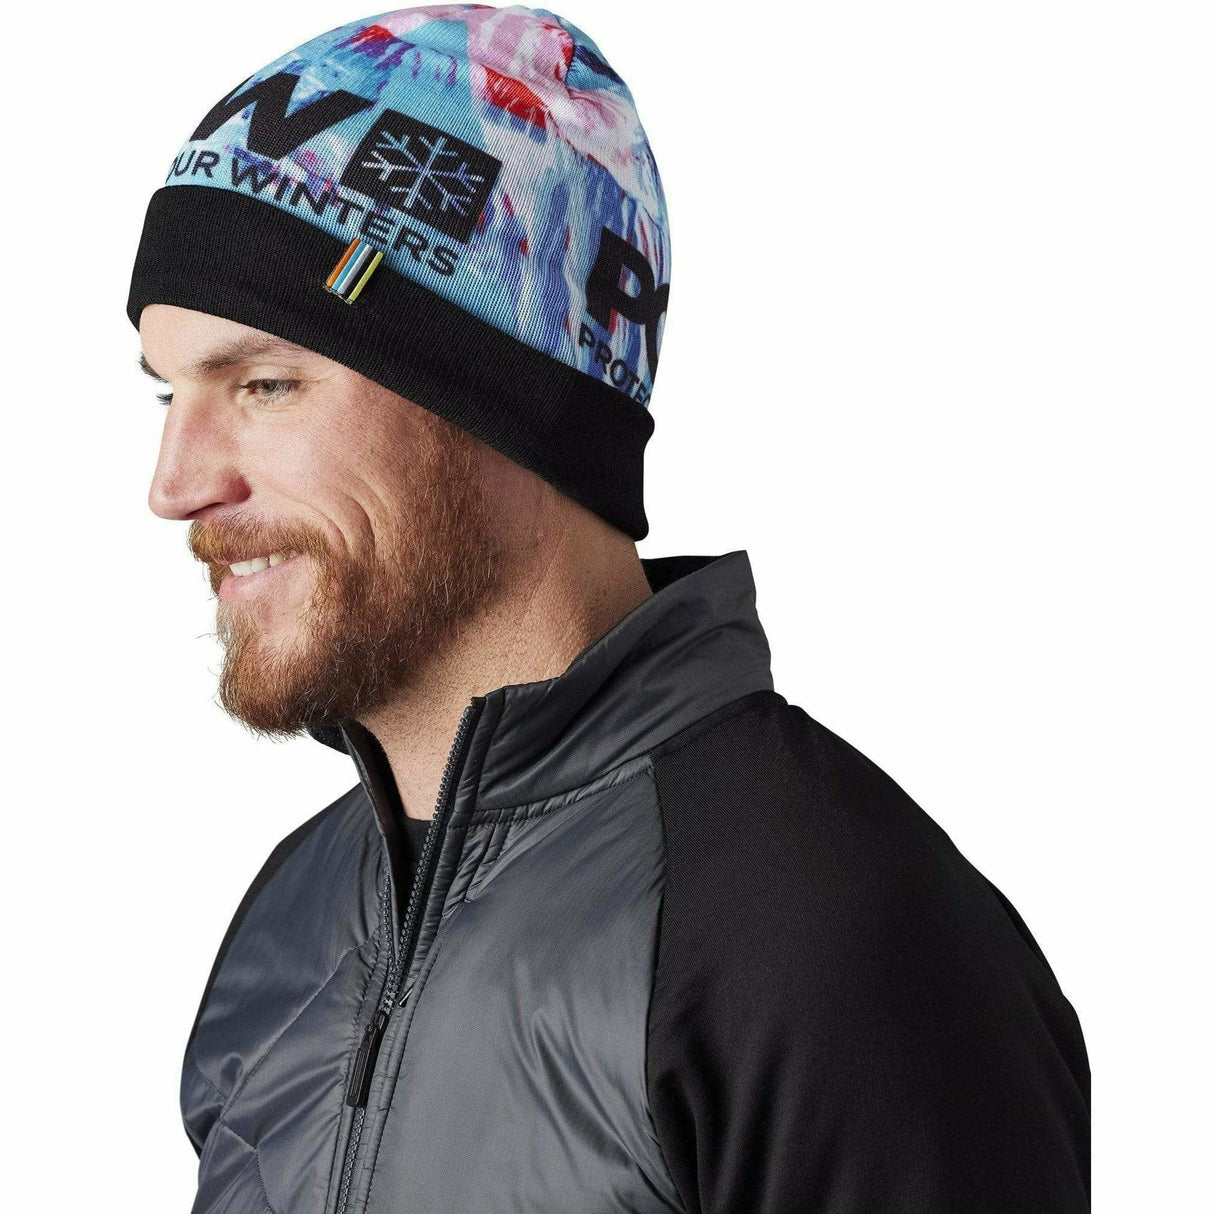 Smartwool Merino Sport POW Beanie  -  One Size Fits Most / Multi Color